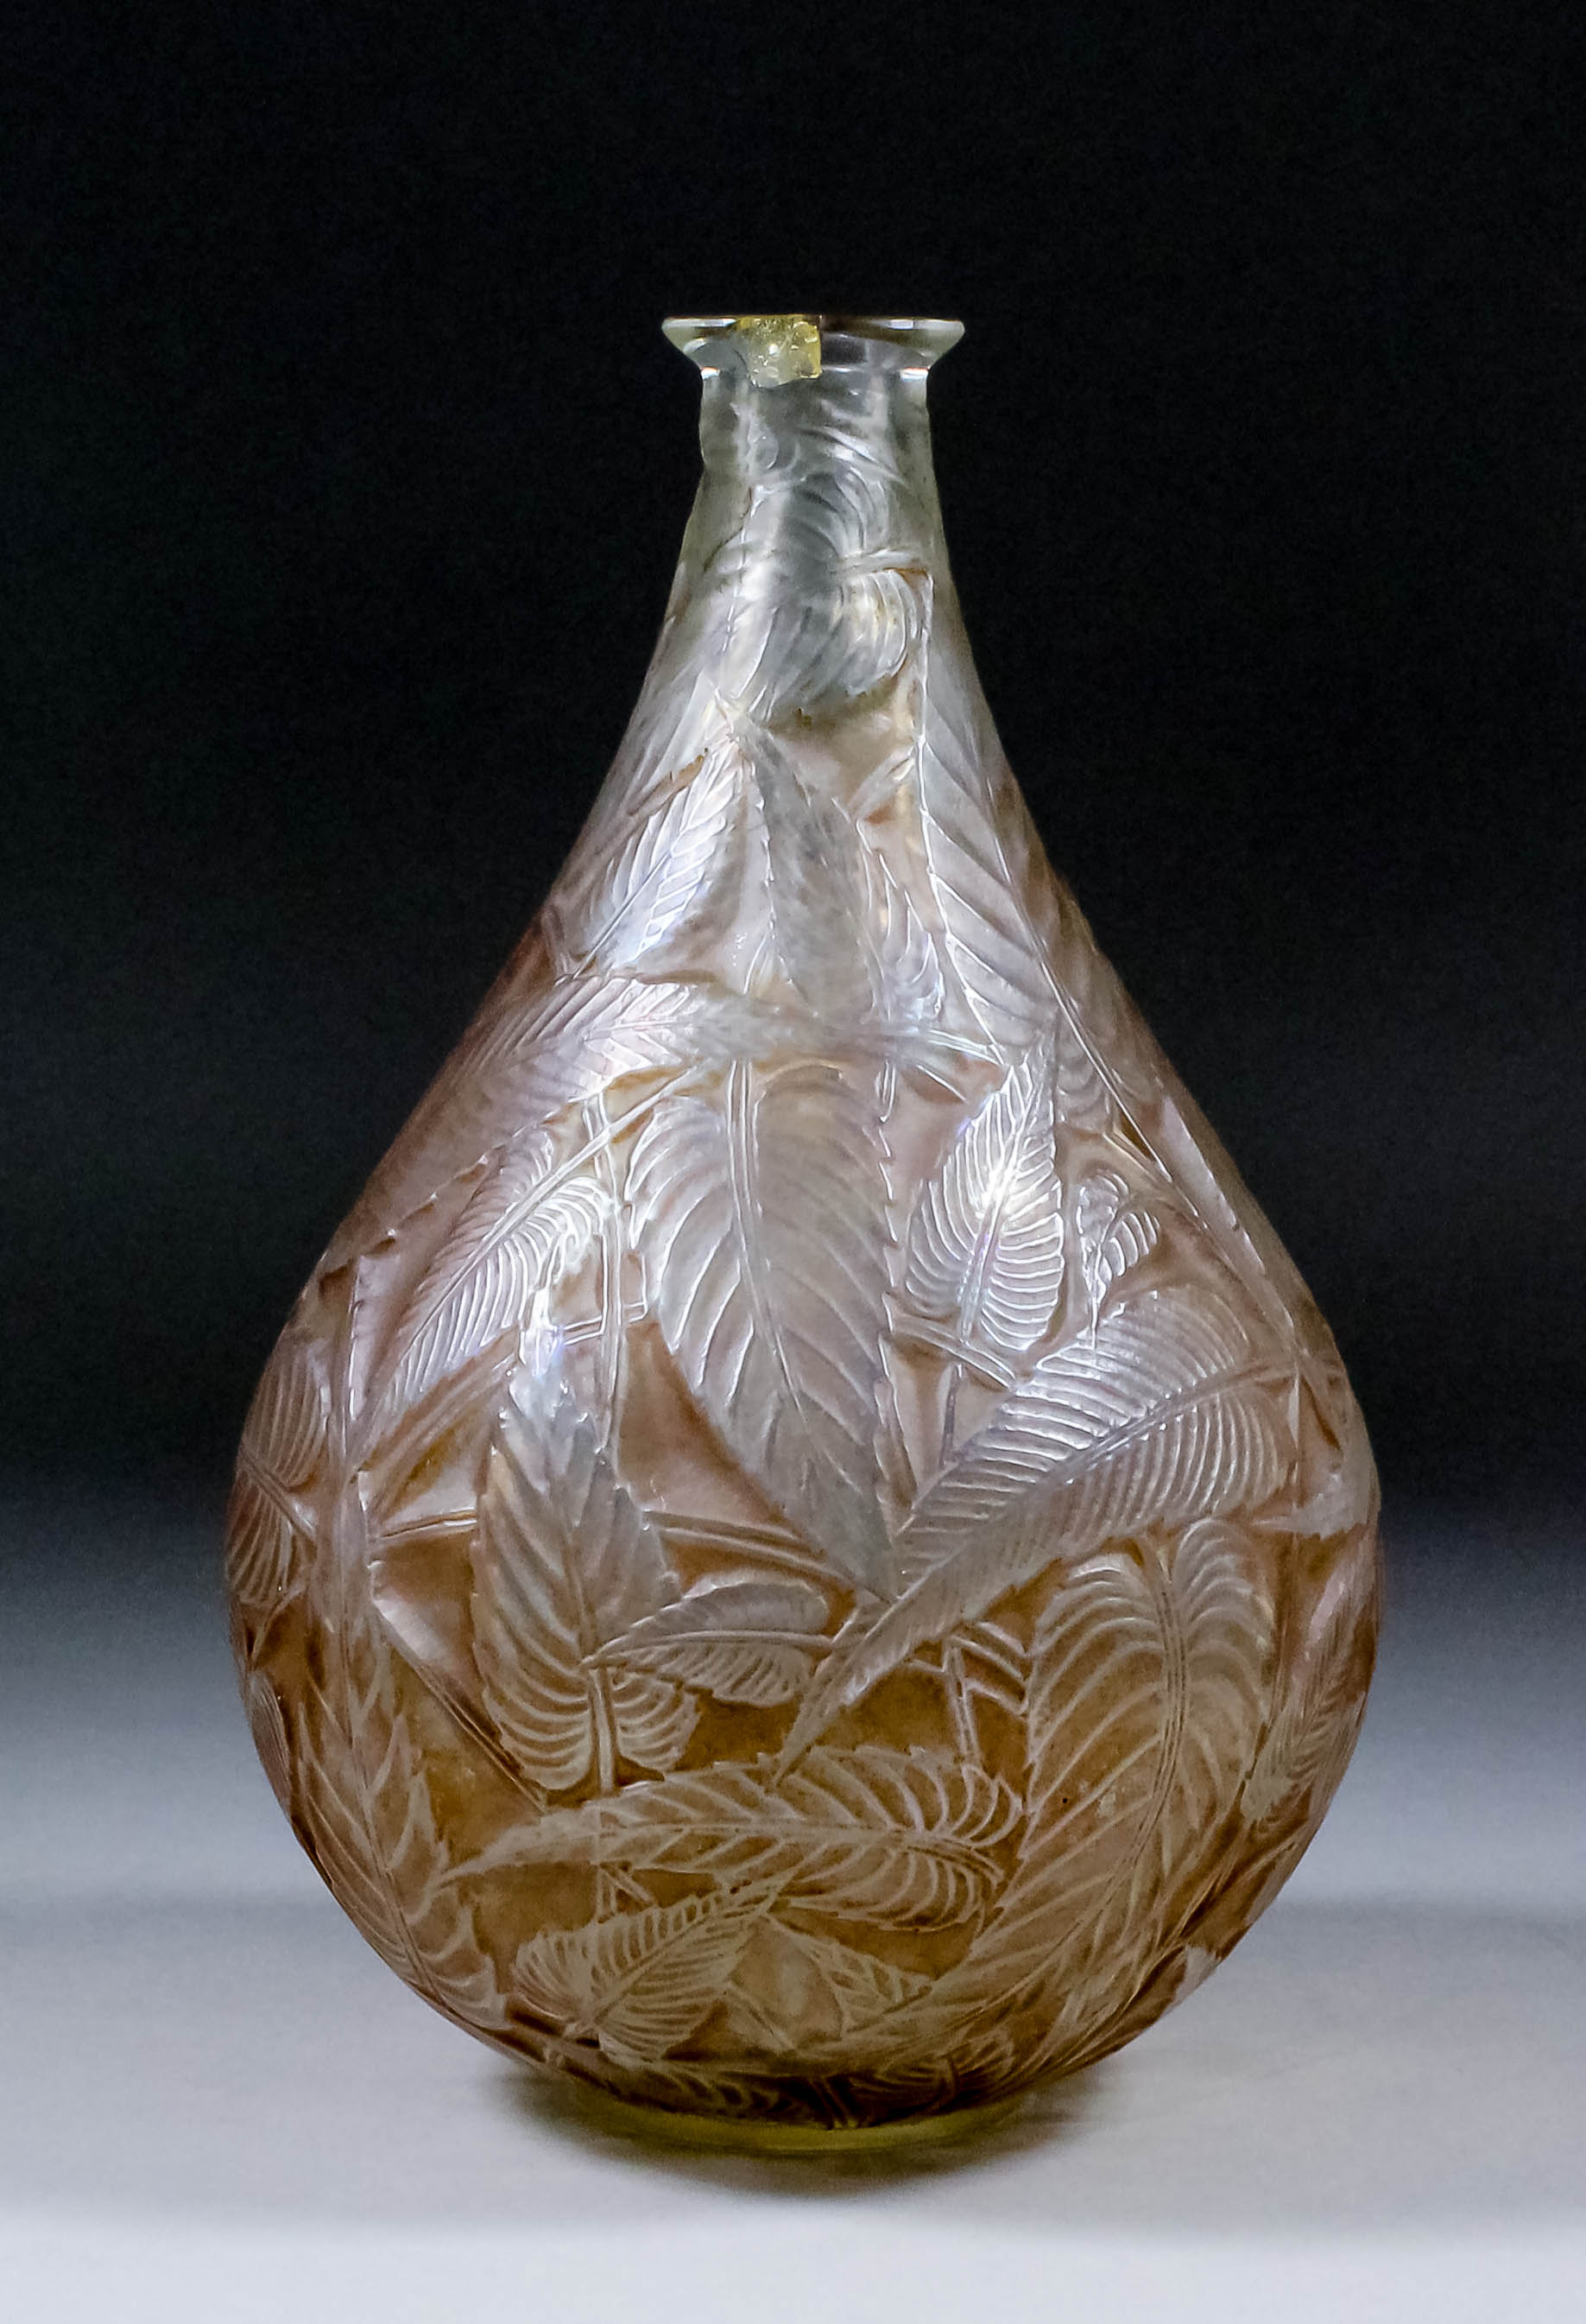 A Lalique glass "Sauge" vase, the body moulded and frosted with interlocking leaves, 10ins high (